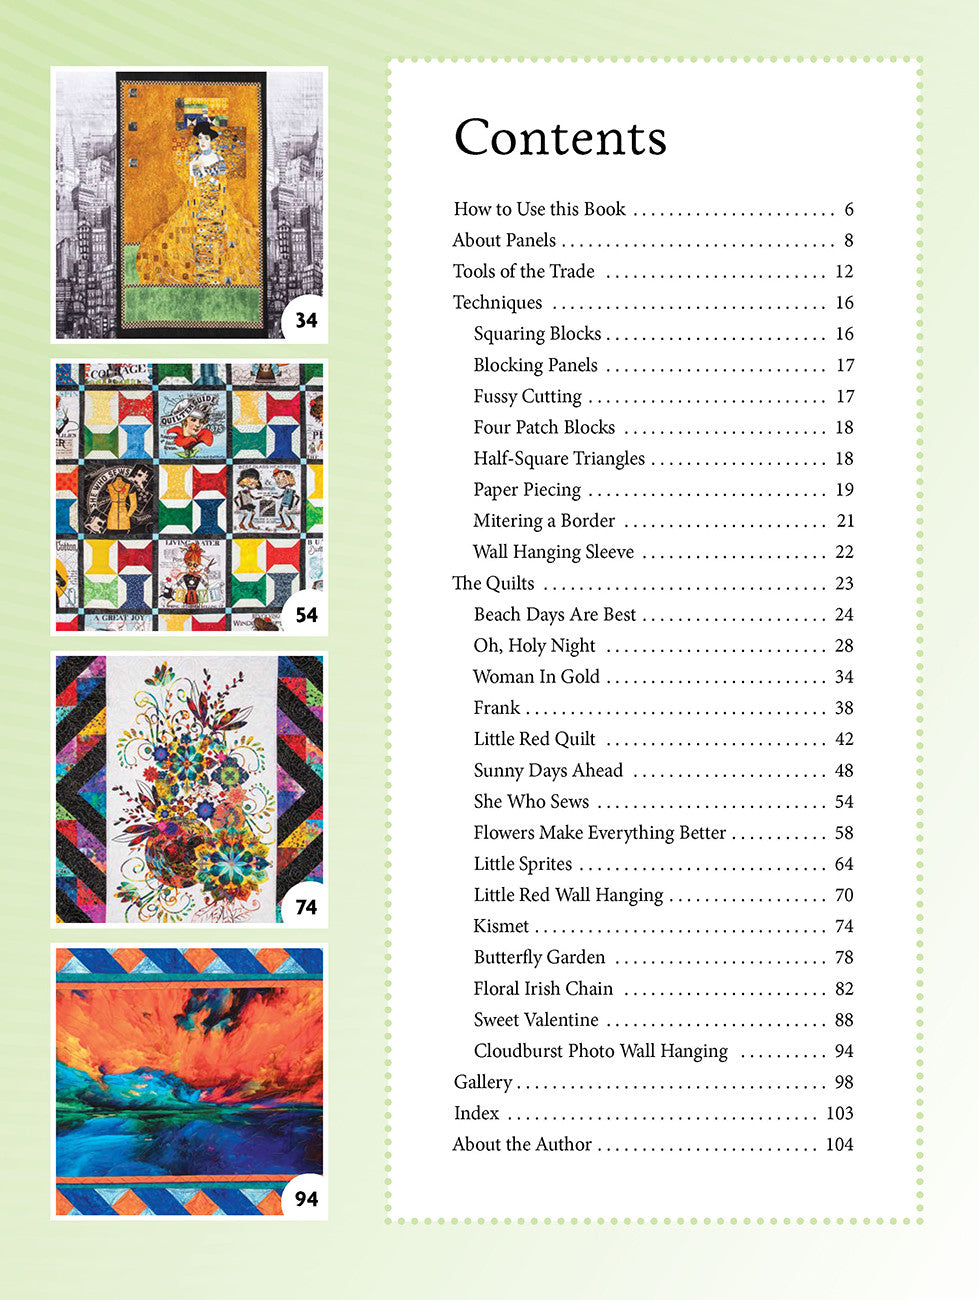 Quilting with Panels and Patchwork, Book